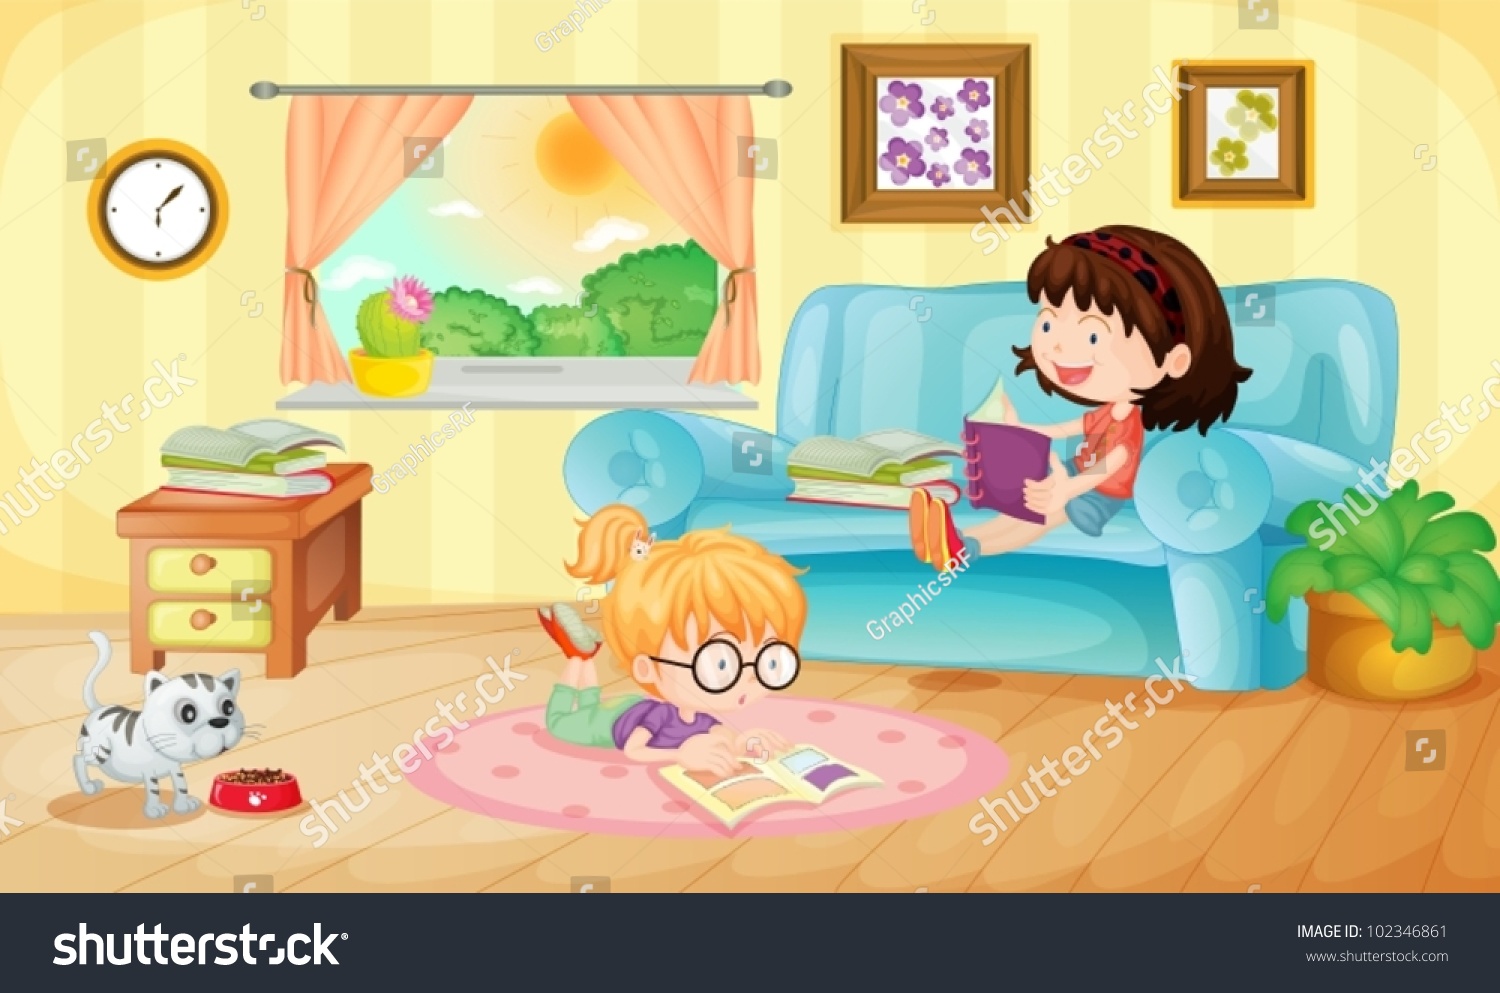 home reading clipart - photo #36